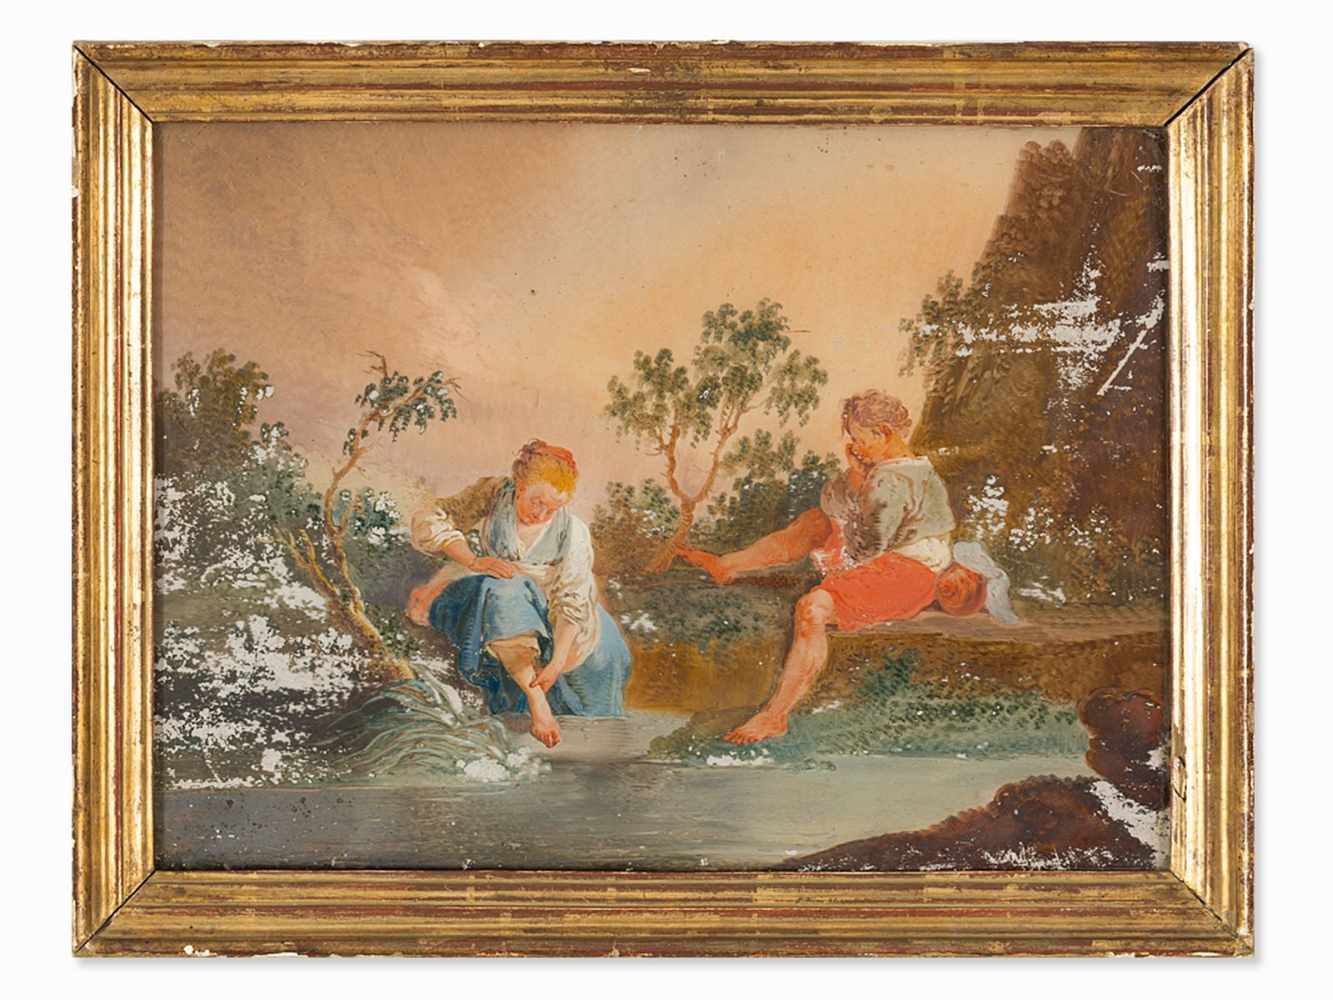 Children By the River, Reverse Glass Painting, French, 18th C.